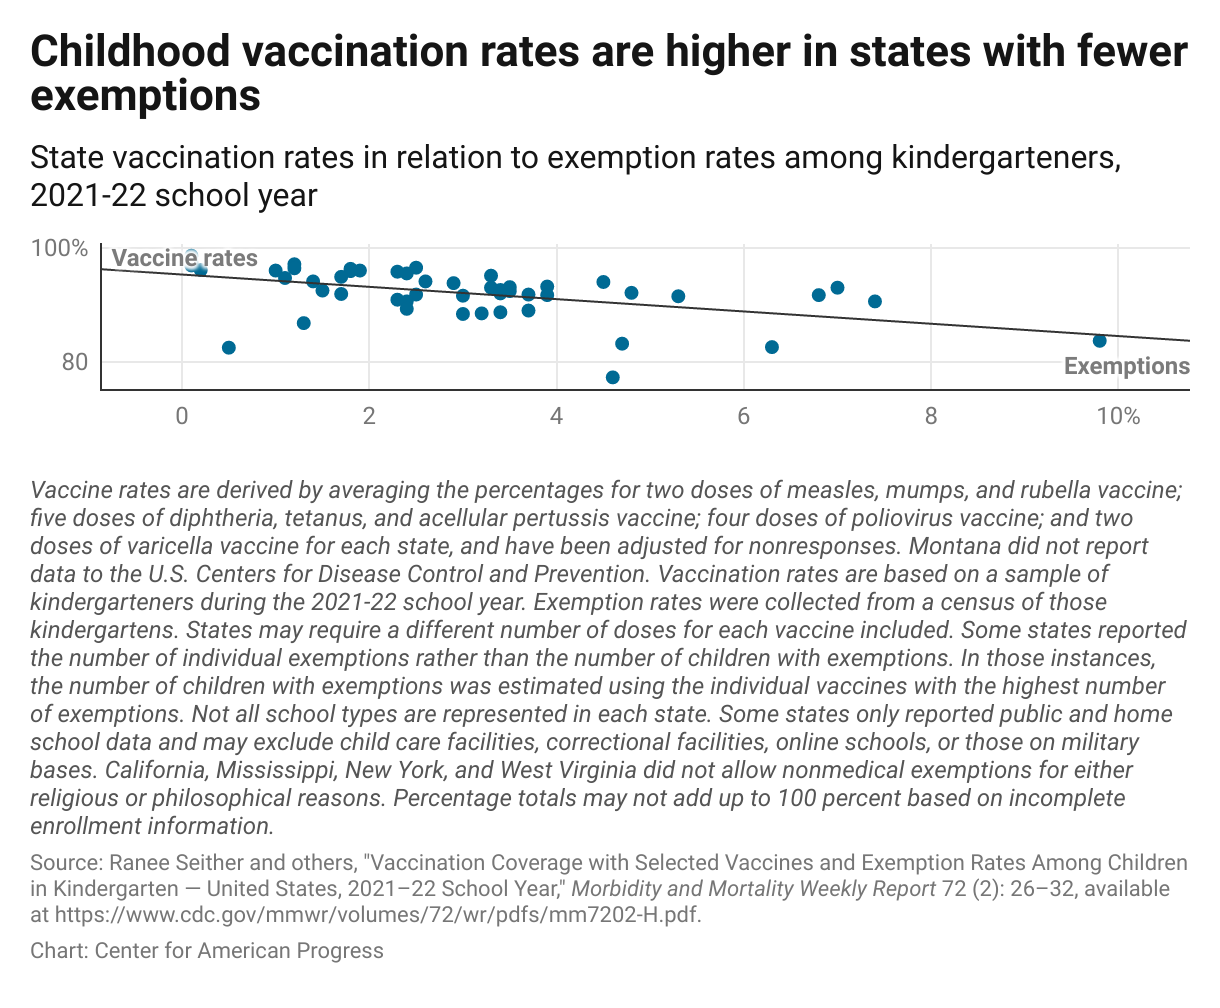 A scatterplot showing the correlation between vaccine rates and exemption rates among kindergarteners, where states with lower vaccine coverage rates tend to also have higher rates of exemptions. 